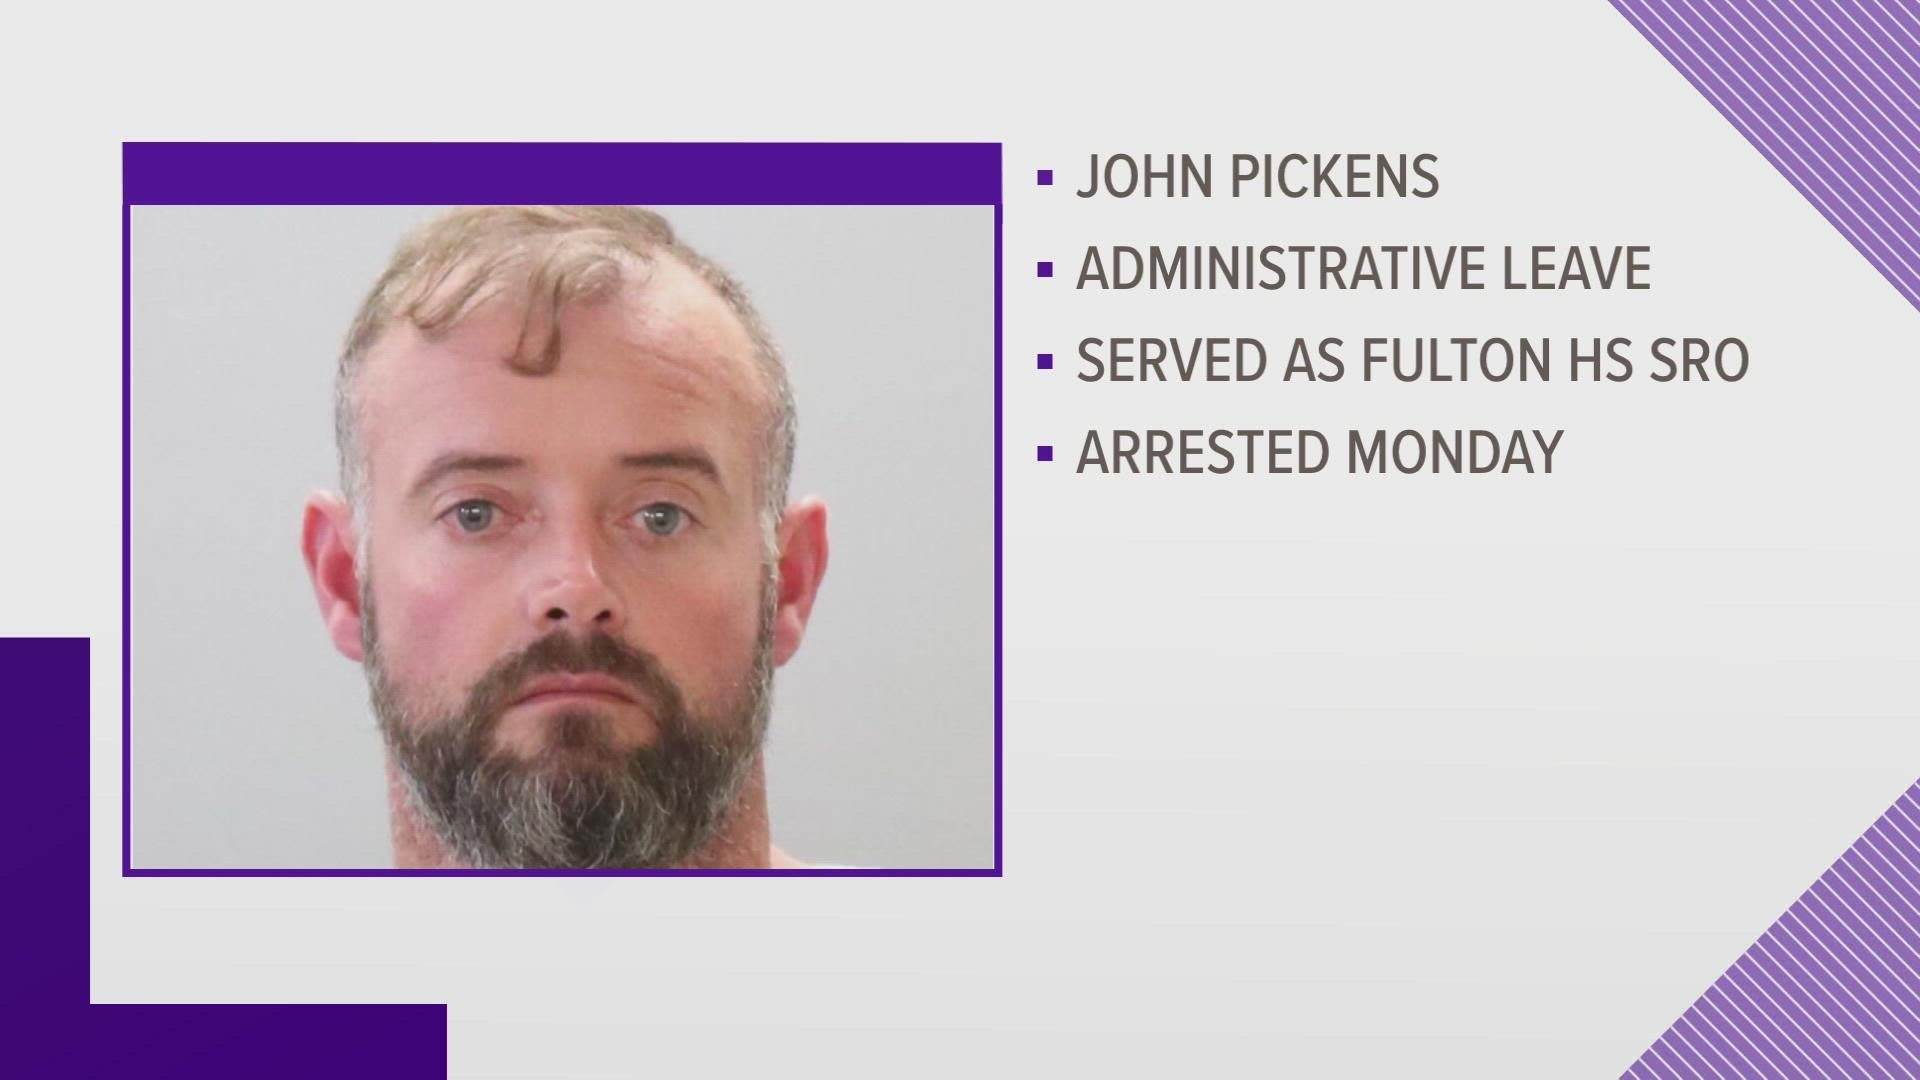 Officer John Pickens was taken into custody by the Knox County Sheriff's Office at Knoxville Police Department headquarters on Monday.